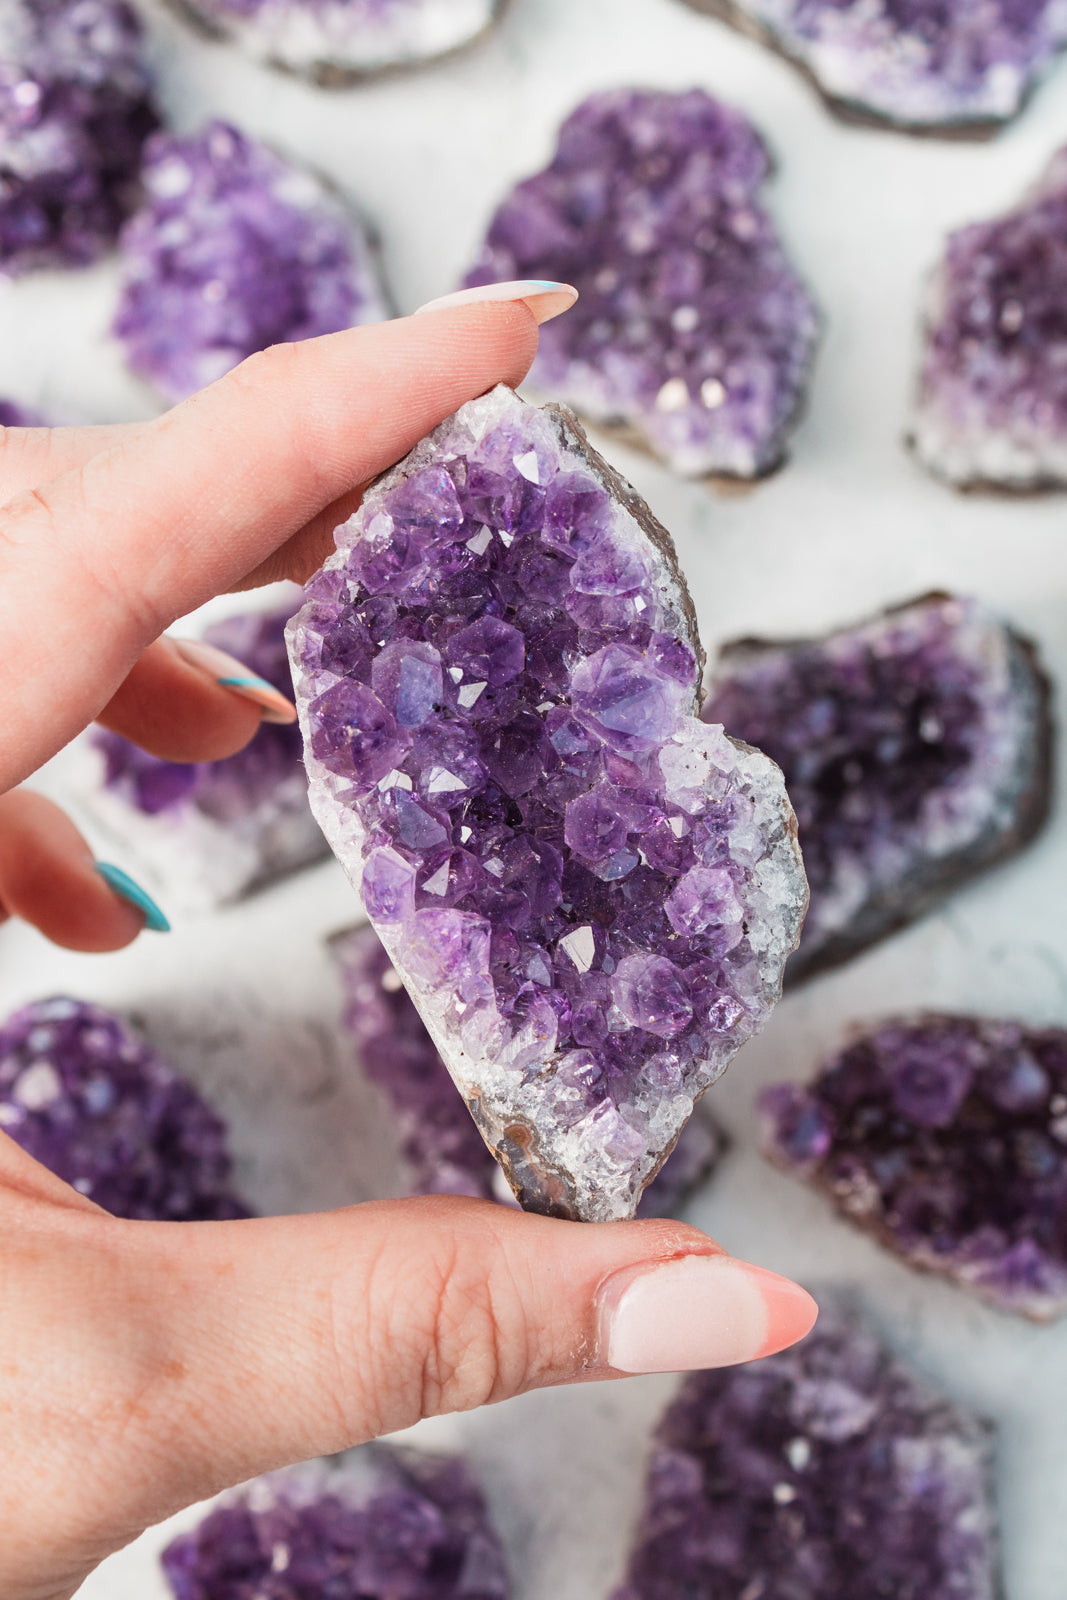 Hand holding amethyst cluster.